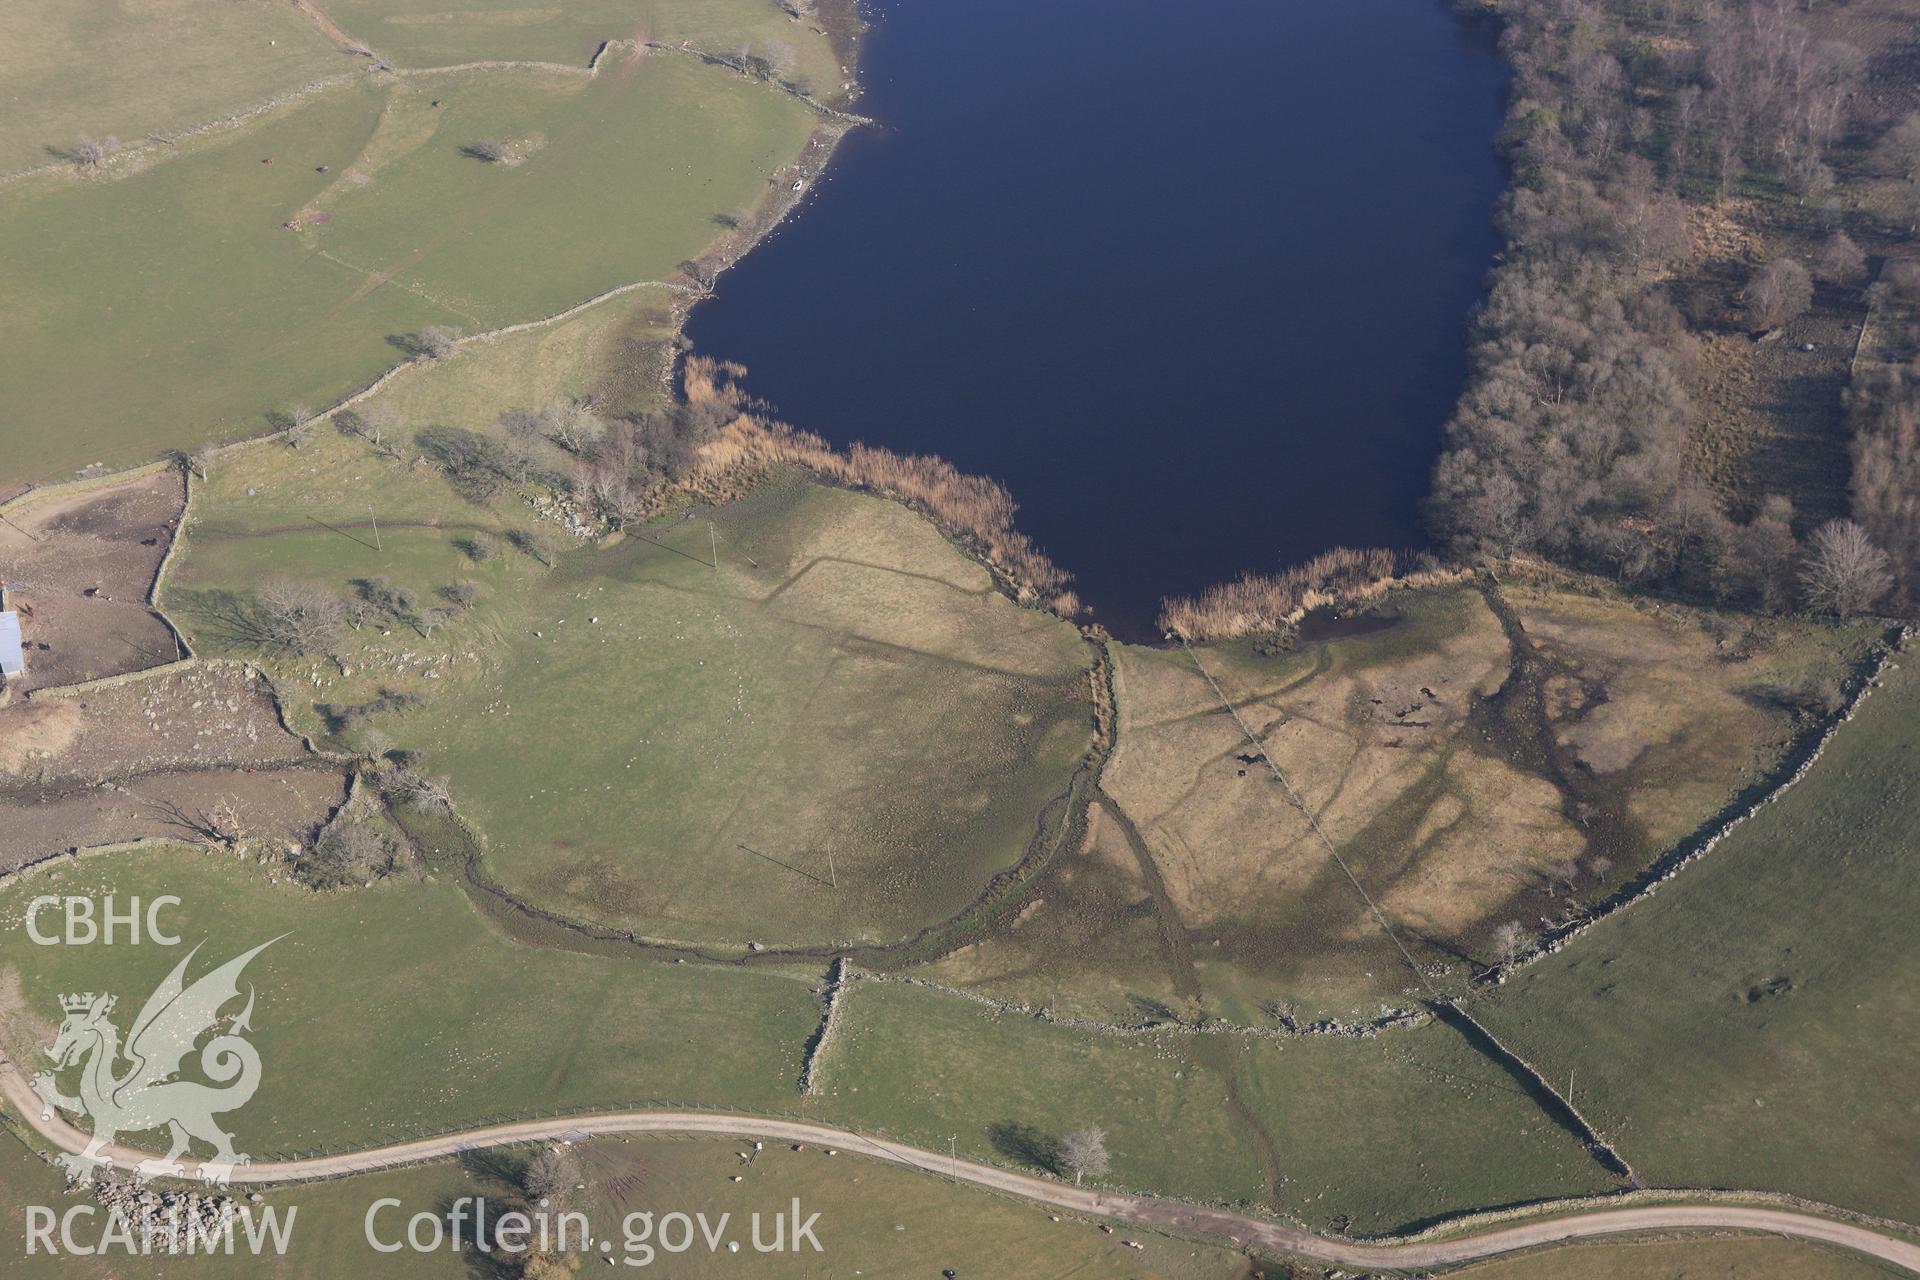 RCAHMW colour oblique photograph of Cwrt-y-Llyn, field drainage earthworks at north-west end of lake. Taken by Toby Driver on 18/03/2009.